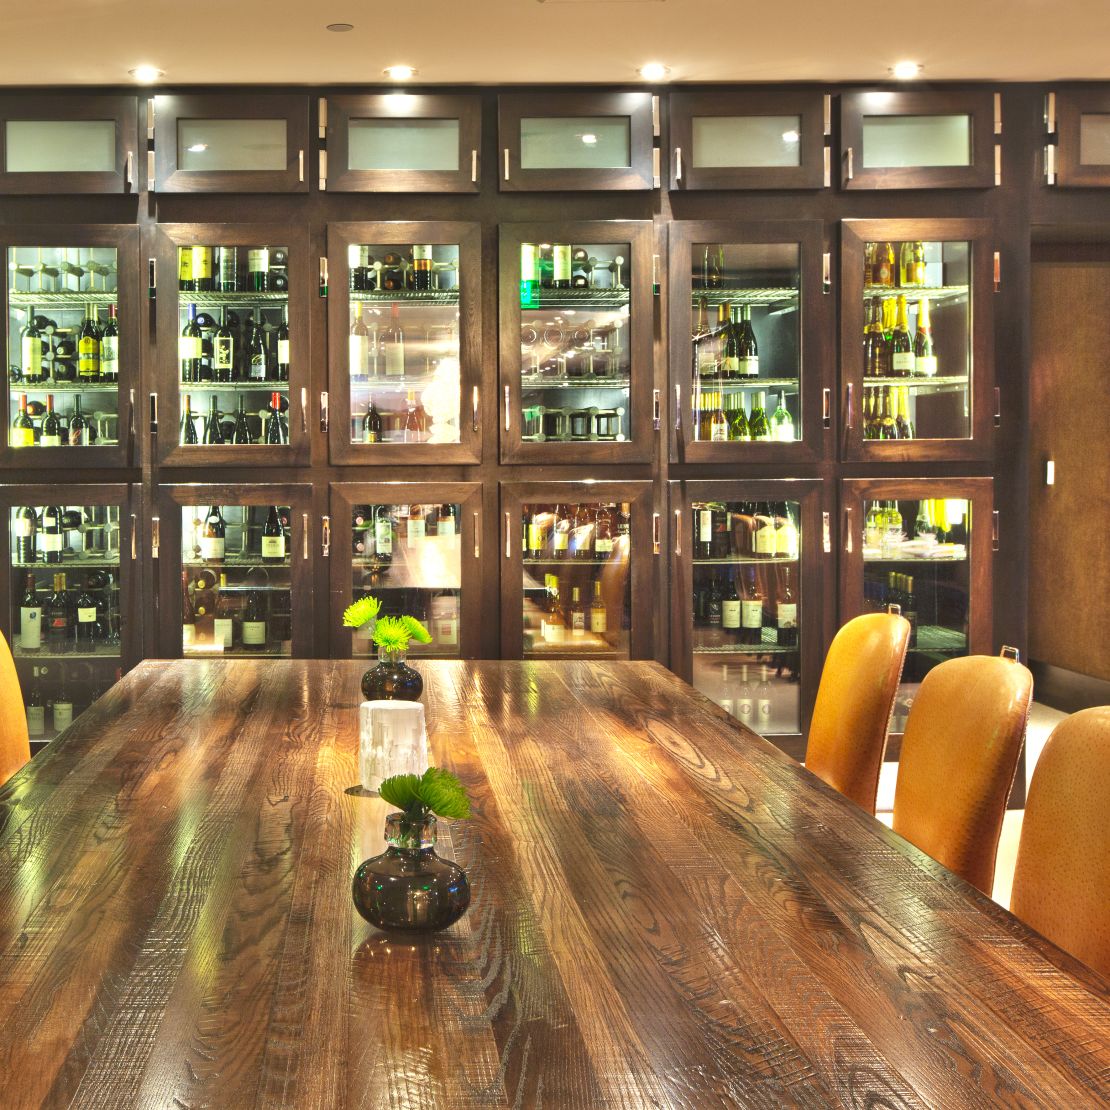 Restaurant Dining Table with Wine Cellar Display